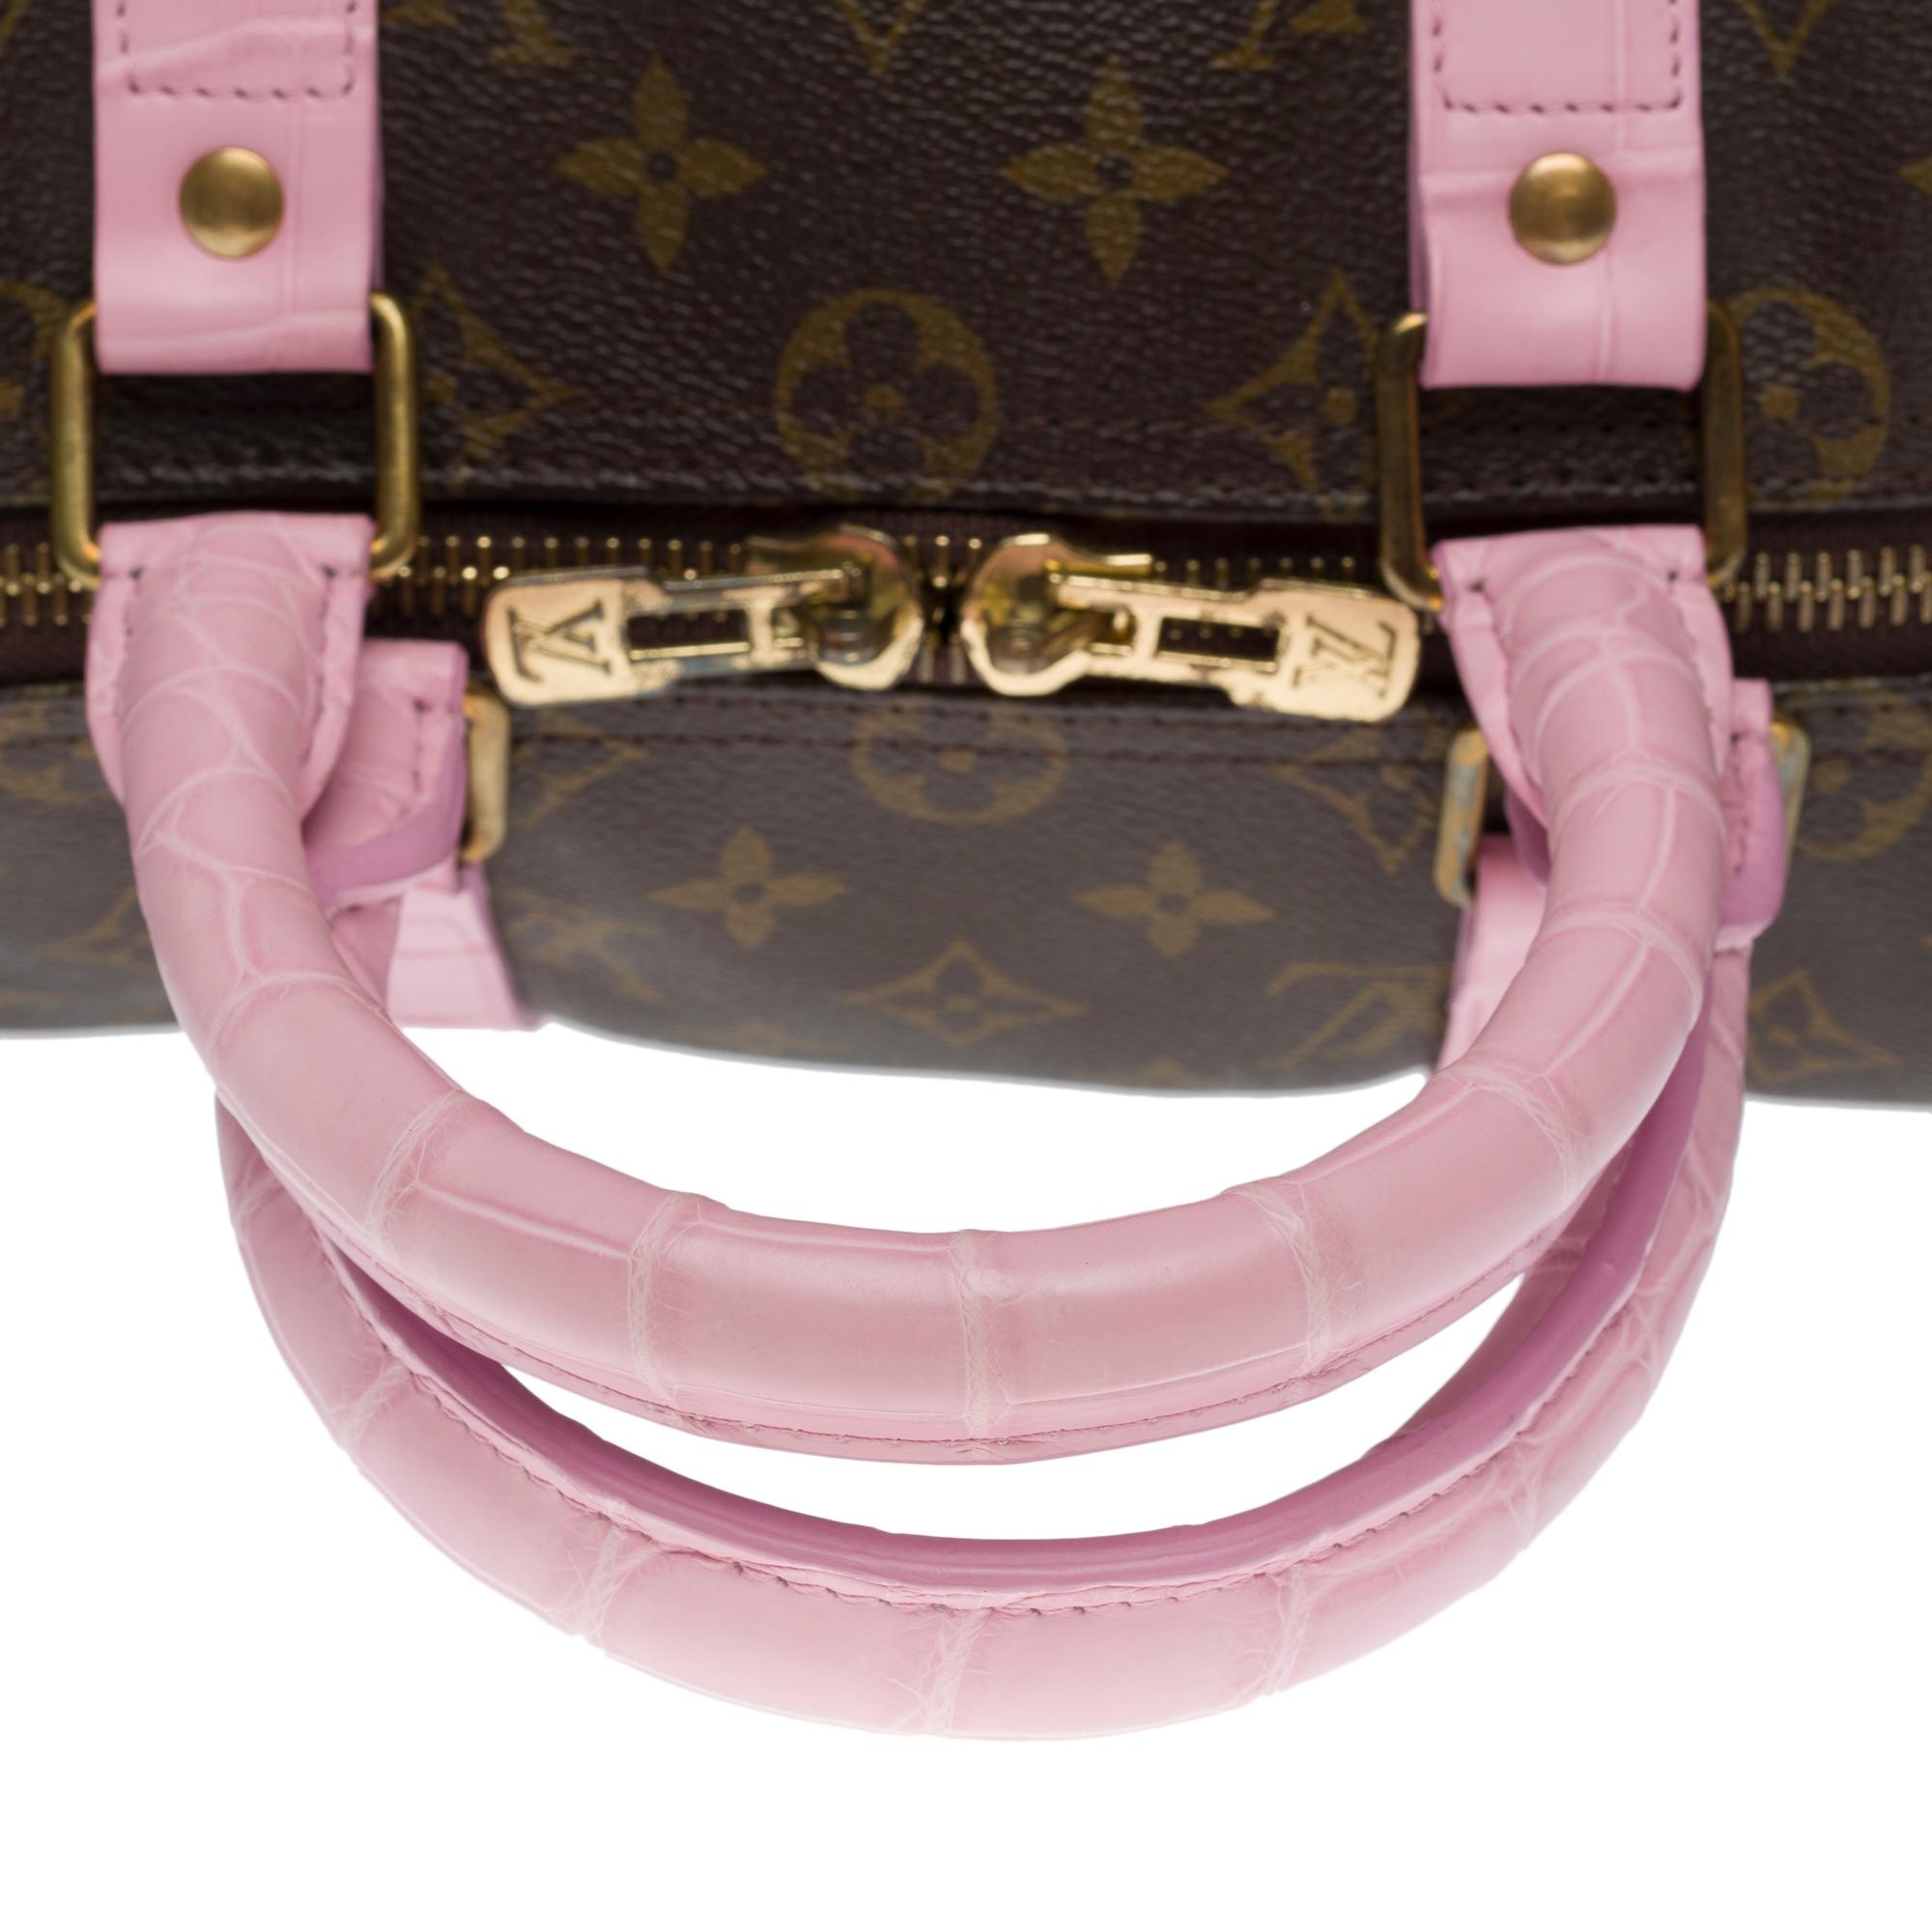 Customized Louis Vuitton Keepall 45 Travel bag with Pink Crocodile leather For Sale 4